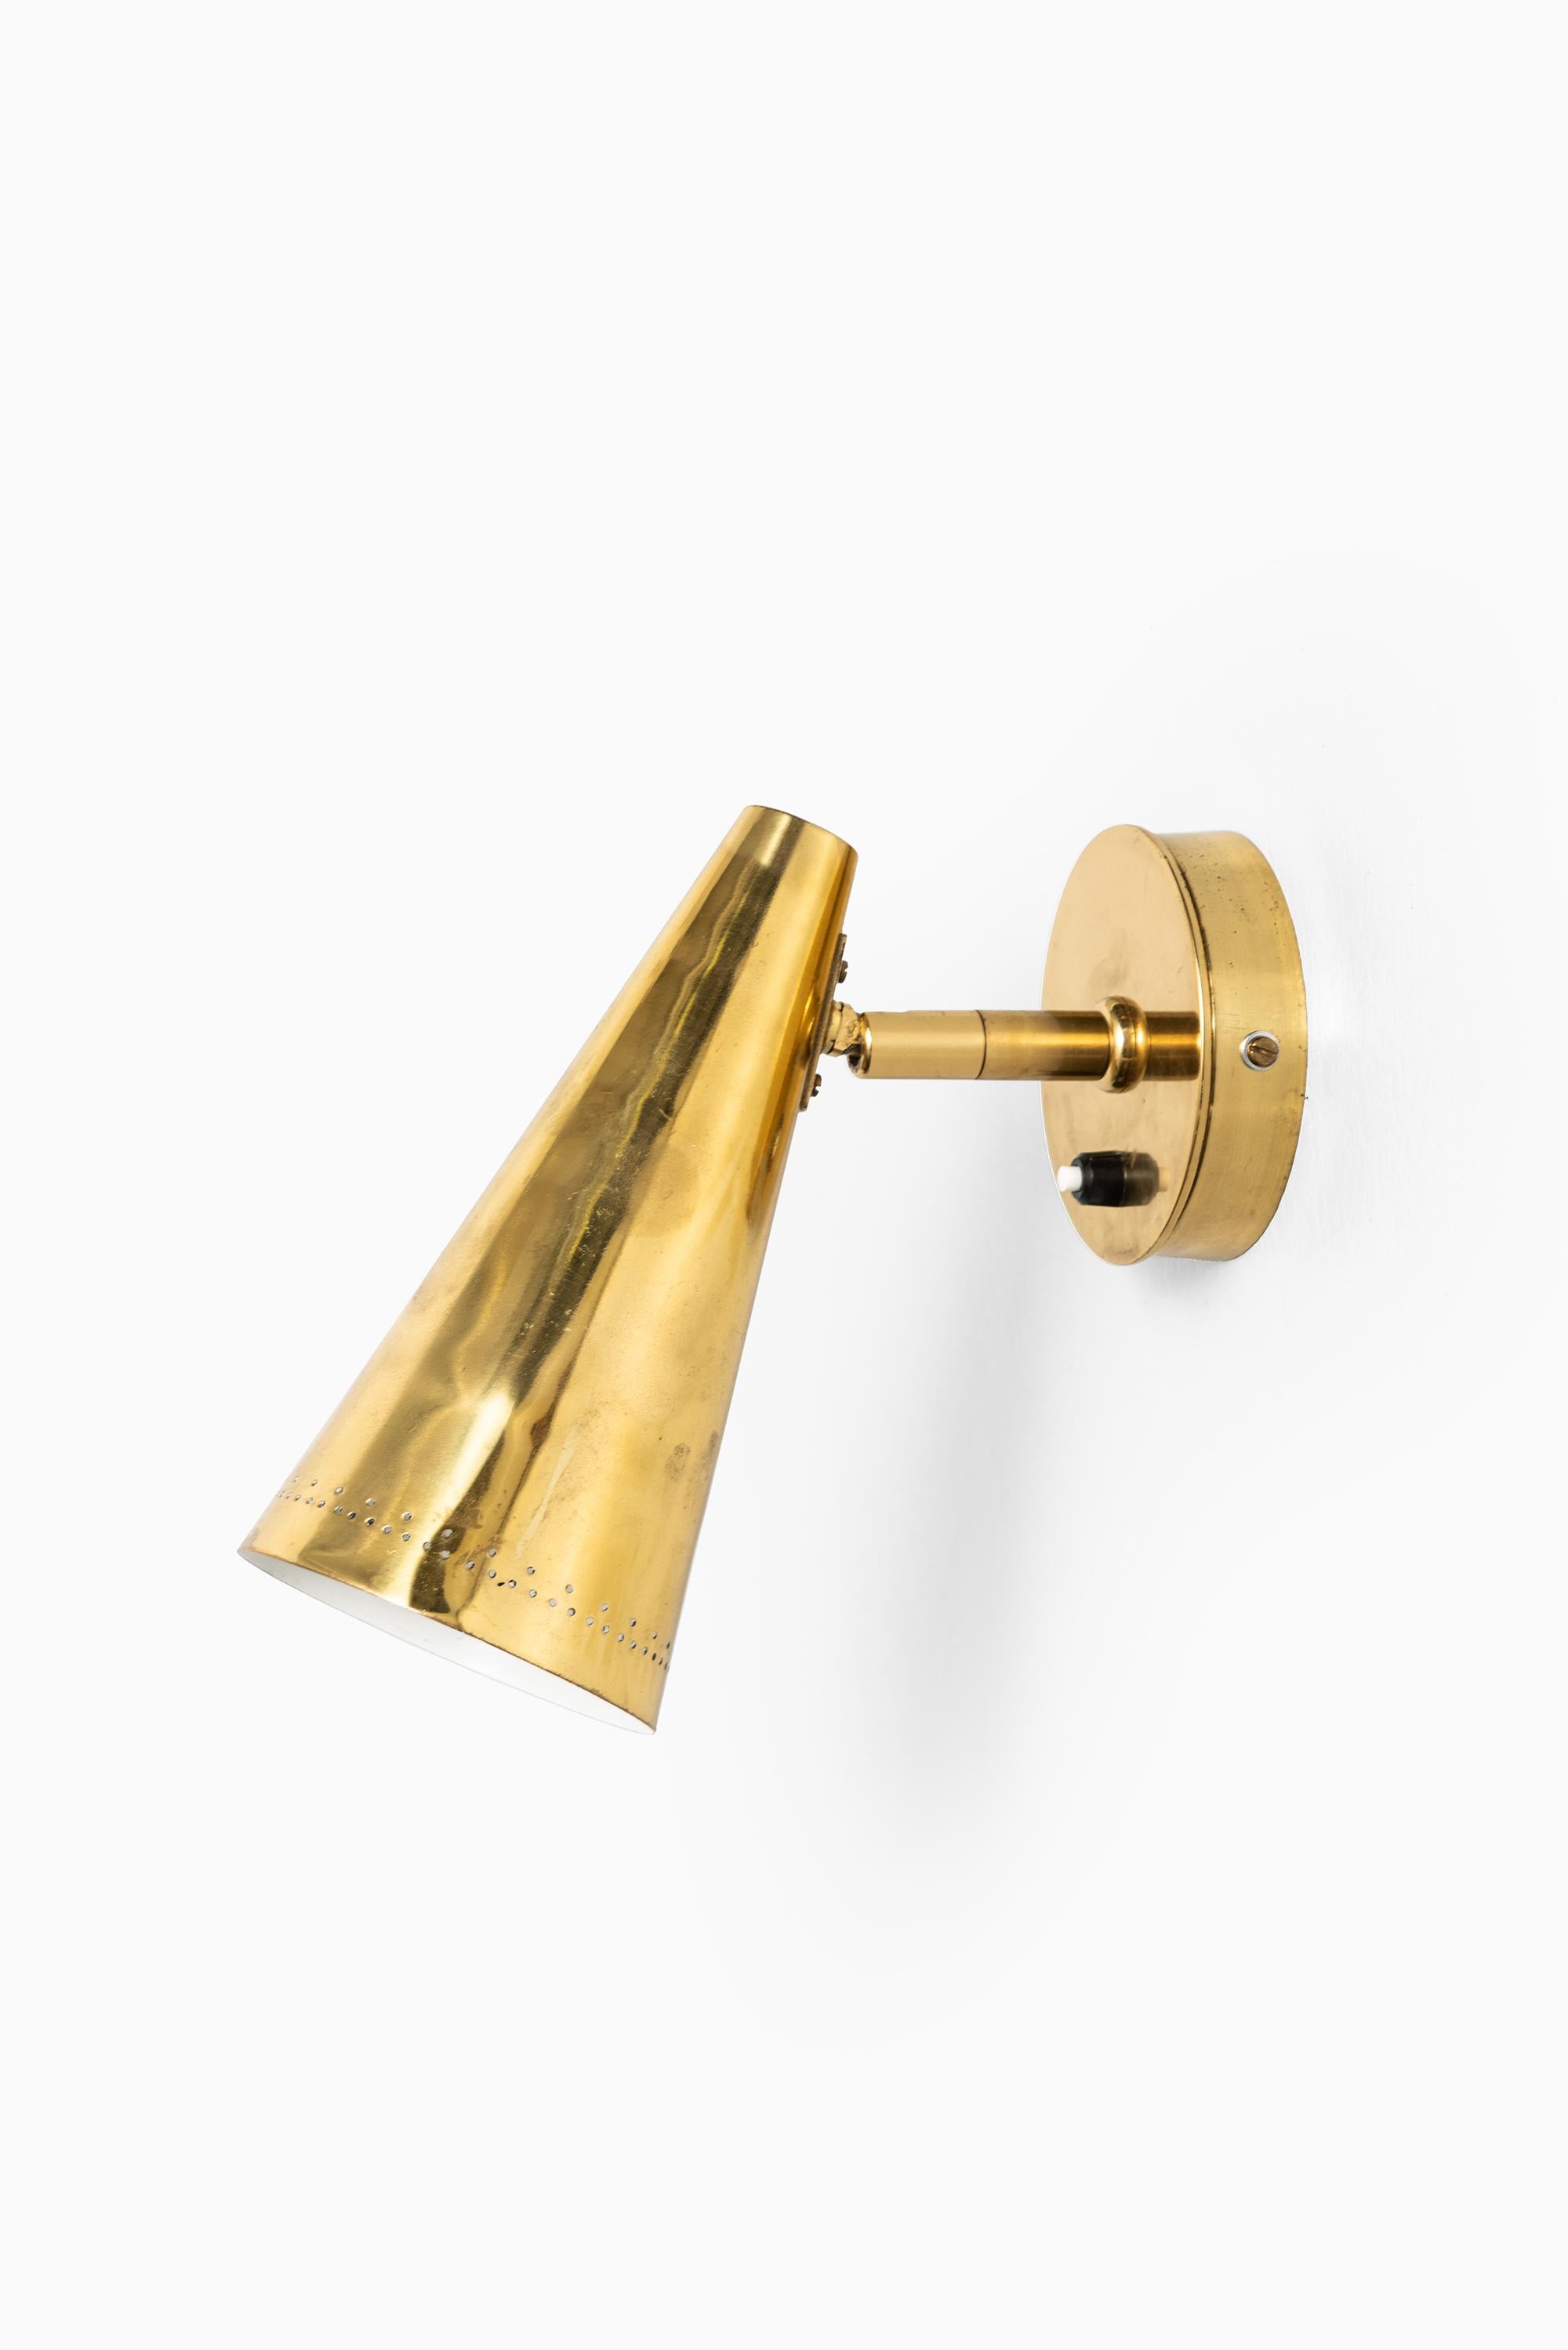 Finnish Large Quantity Wall Lamps in Brass Attributed to Lisa Johansson-Pape